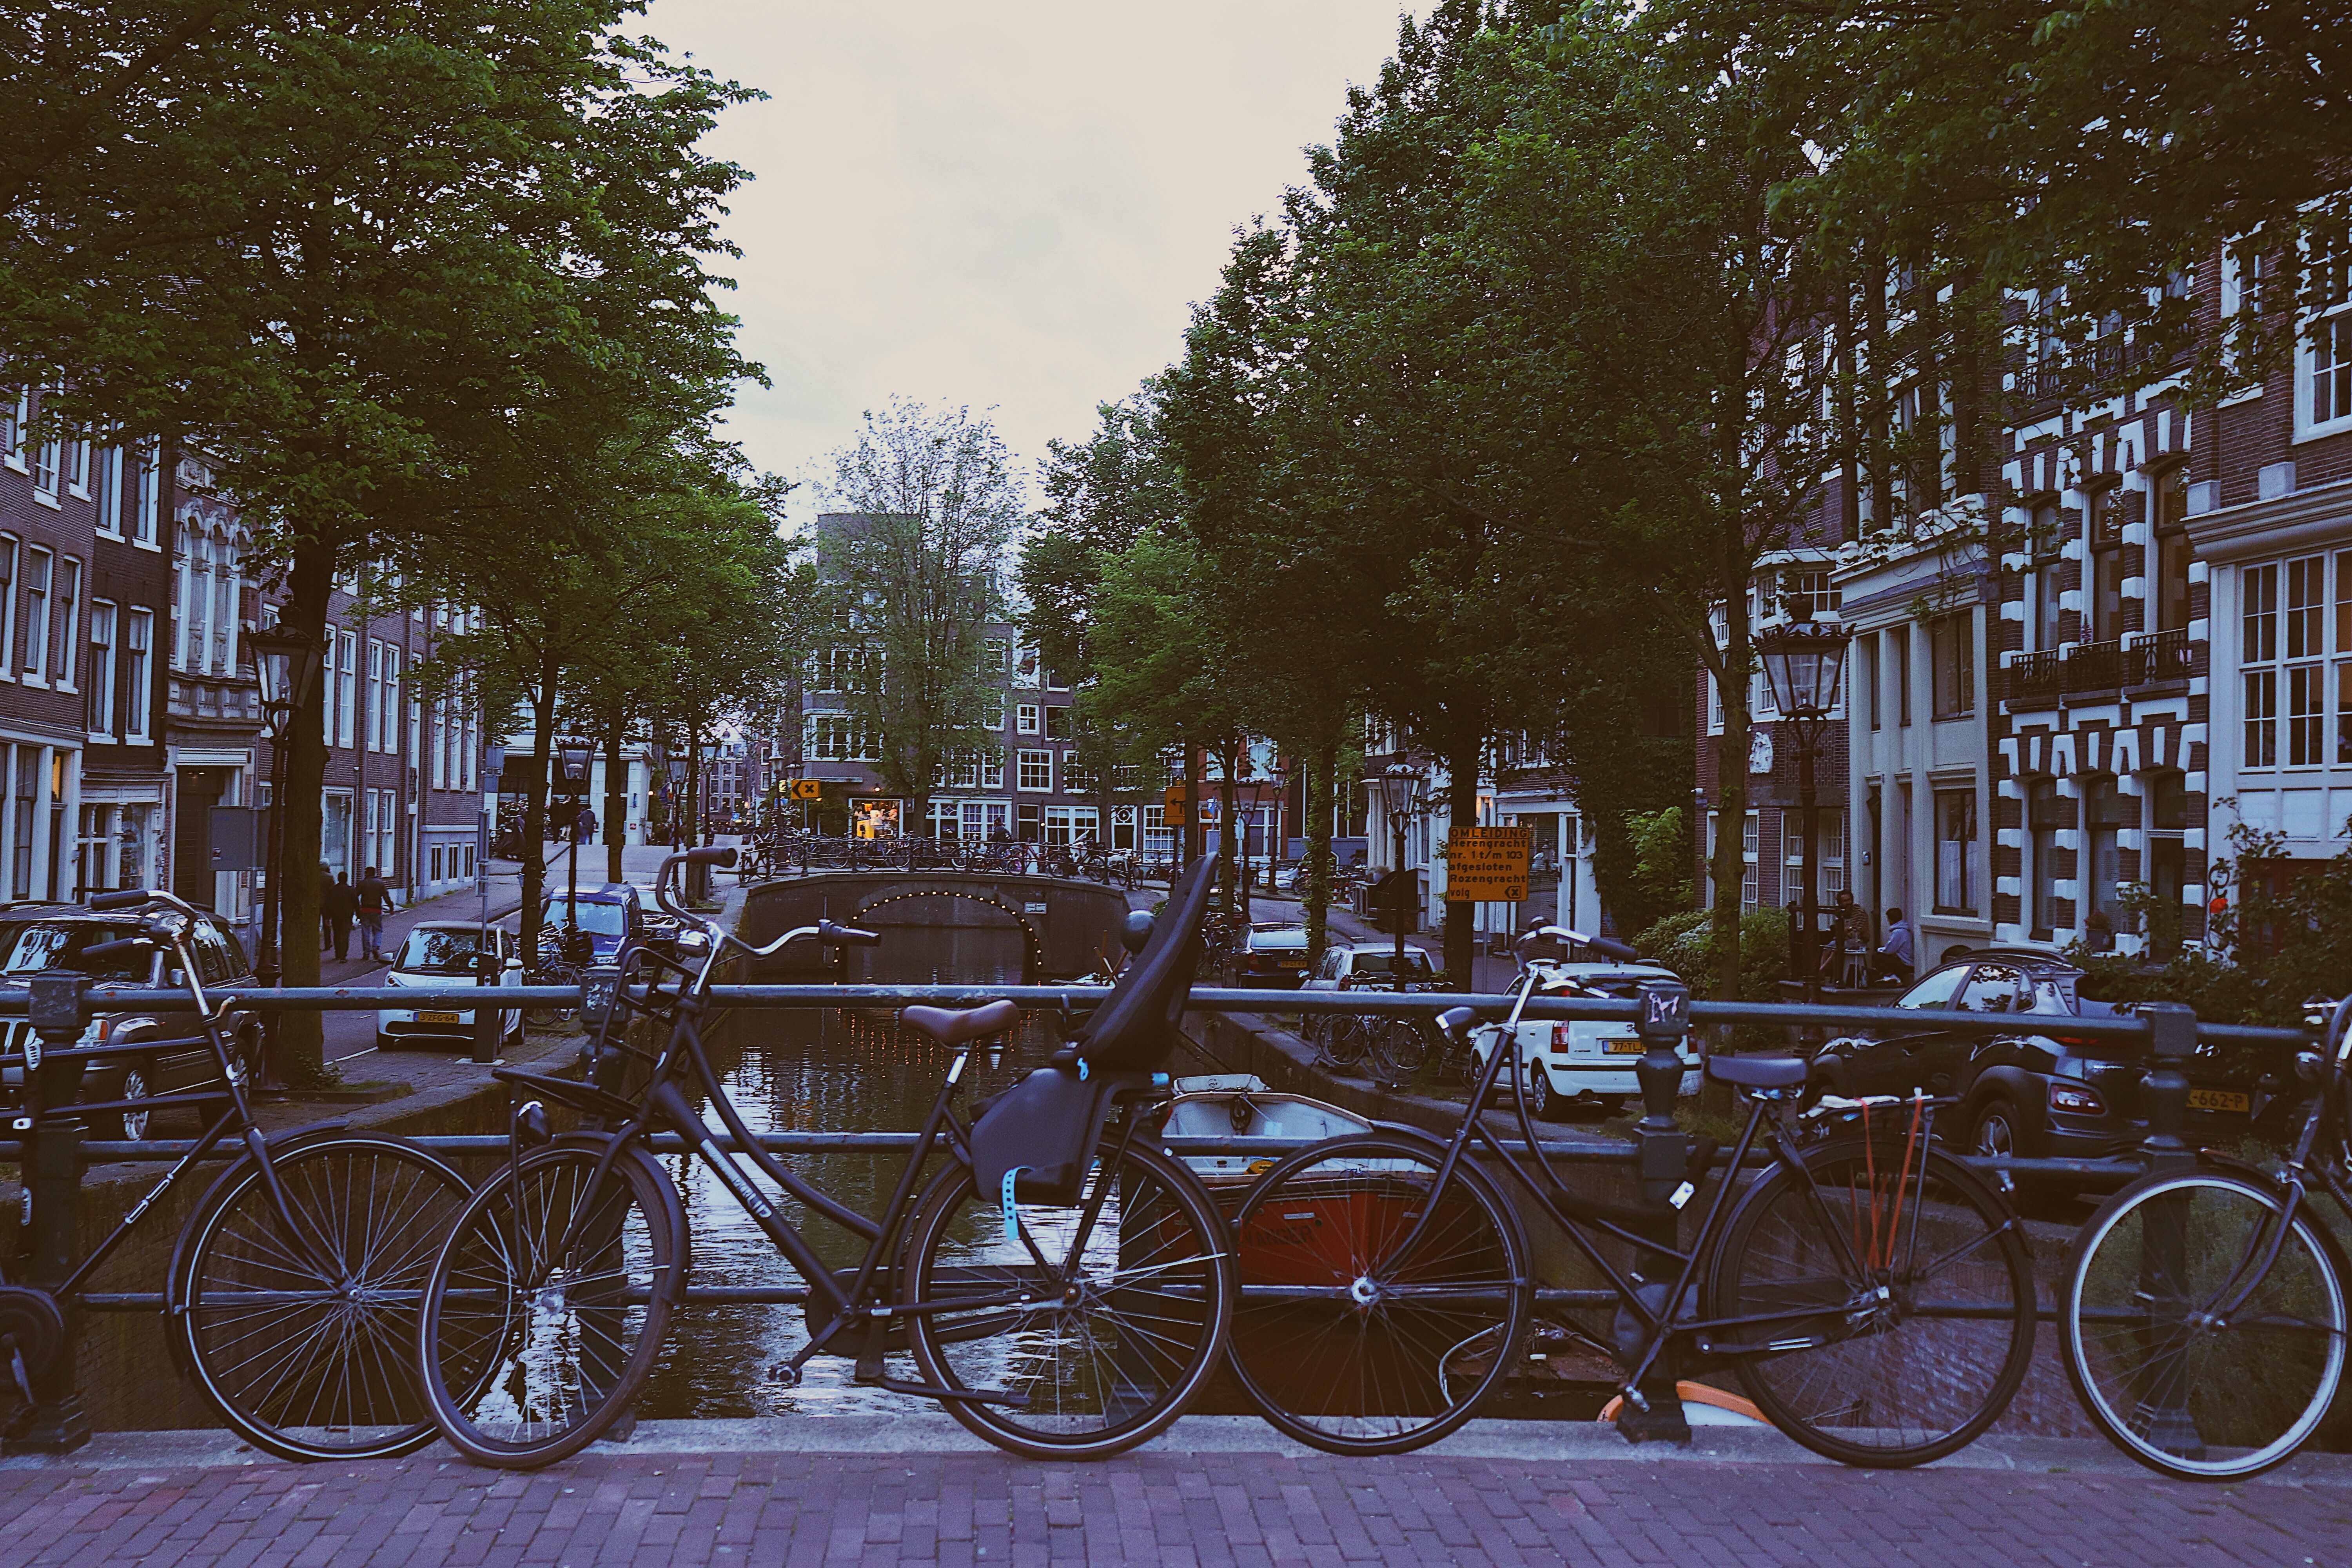 Photo of bikes lined up on one of the bridges over the canals in Amsterdam, Netherlands with Dutch architecture in the backgrounds.